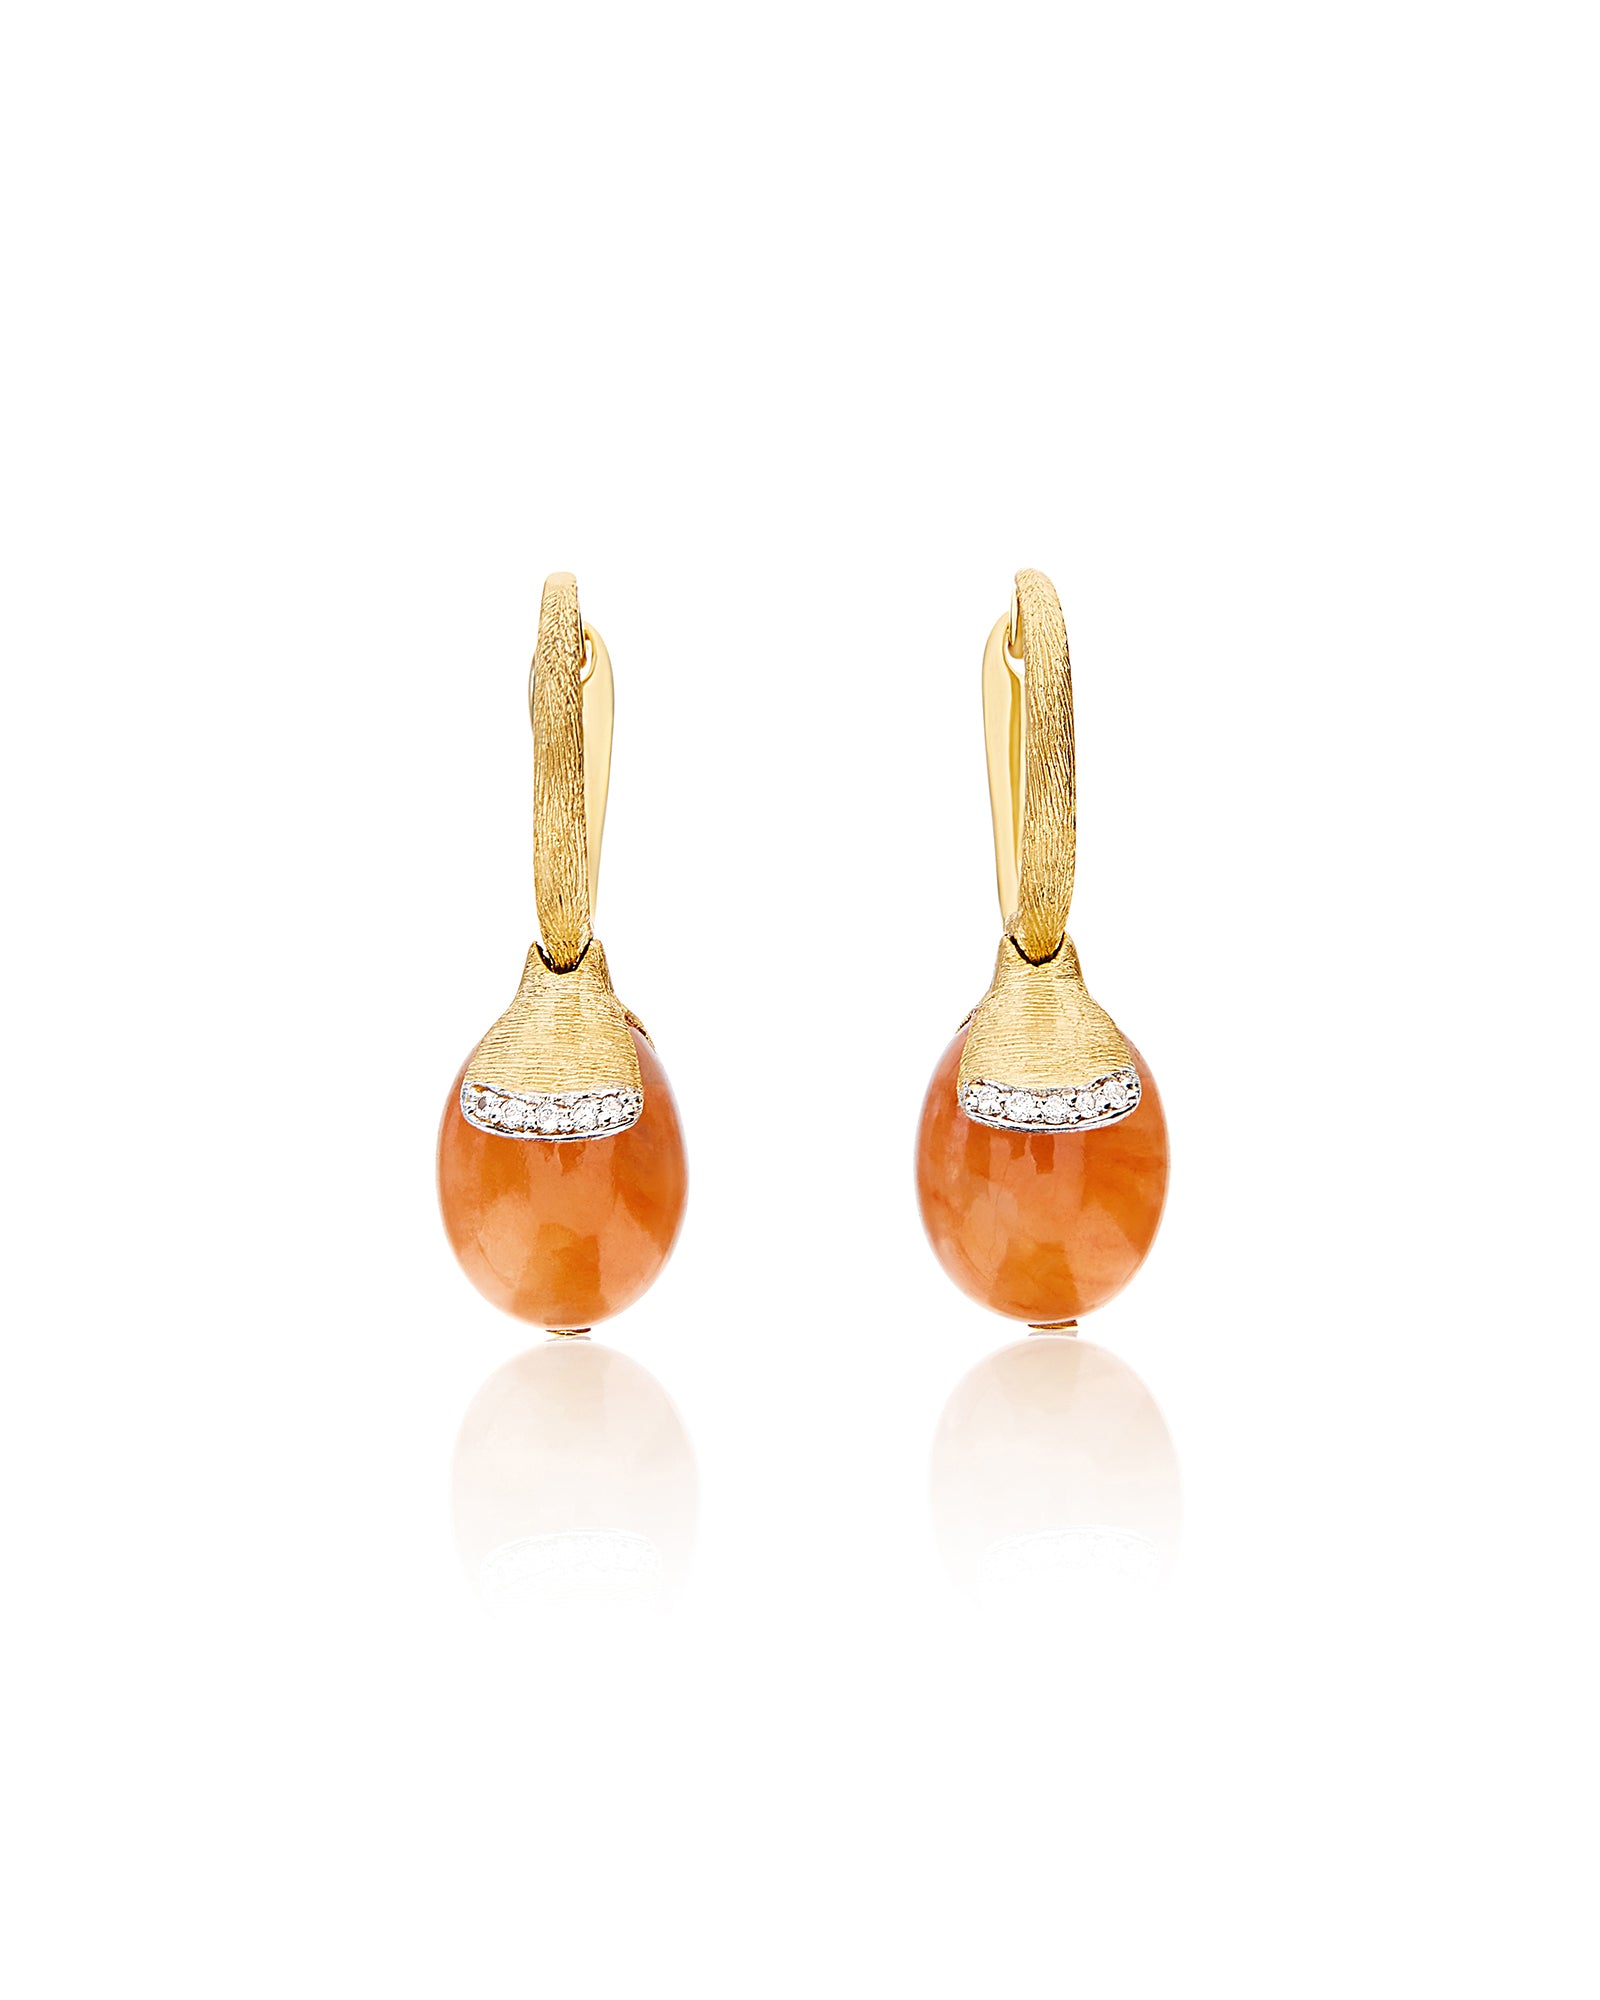 Petra "Amulets" Ciliegine Gold and Orange Aventurine Ball Drop Earrings with Diamonds Details (SMALL)